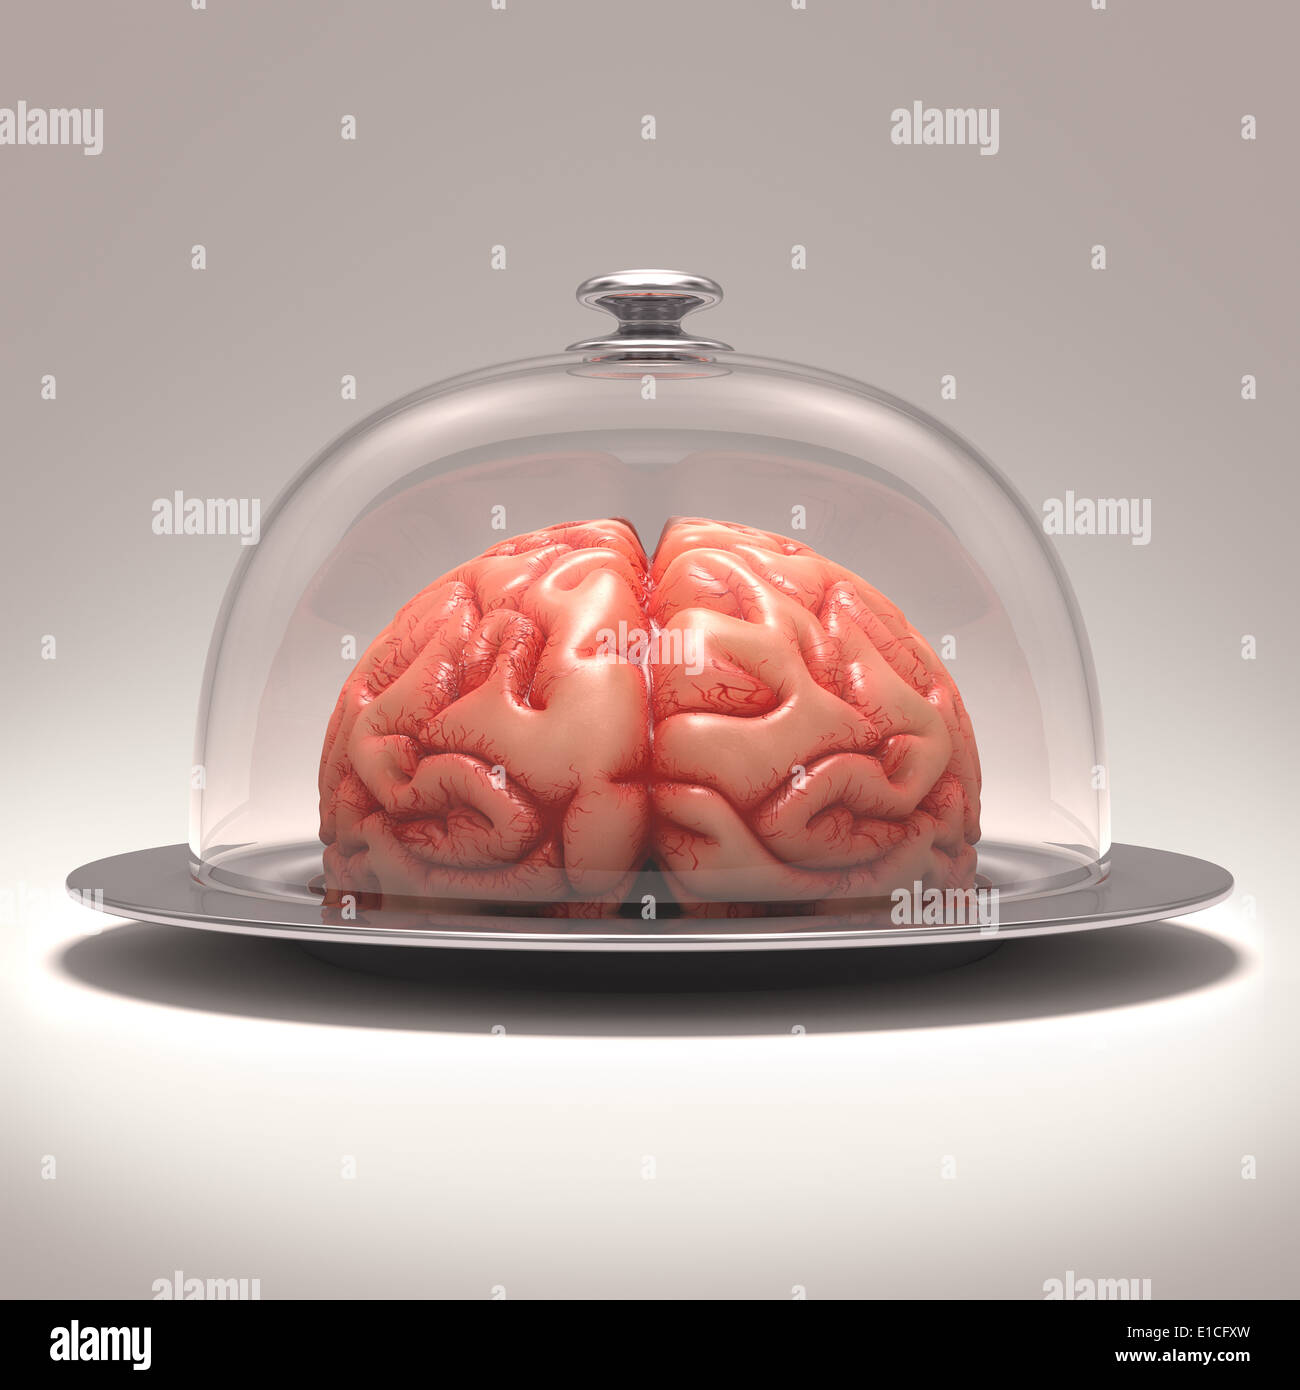 Brain over a stainless steel platter covered by a glass cover. Clipping path included. Stock Photo